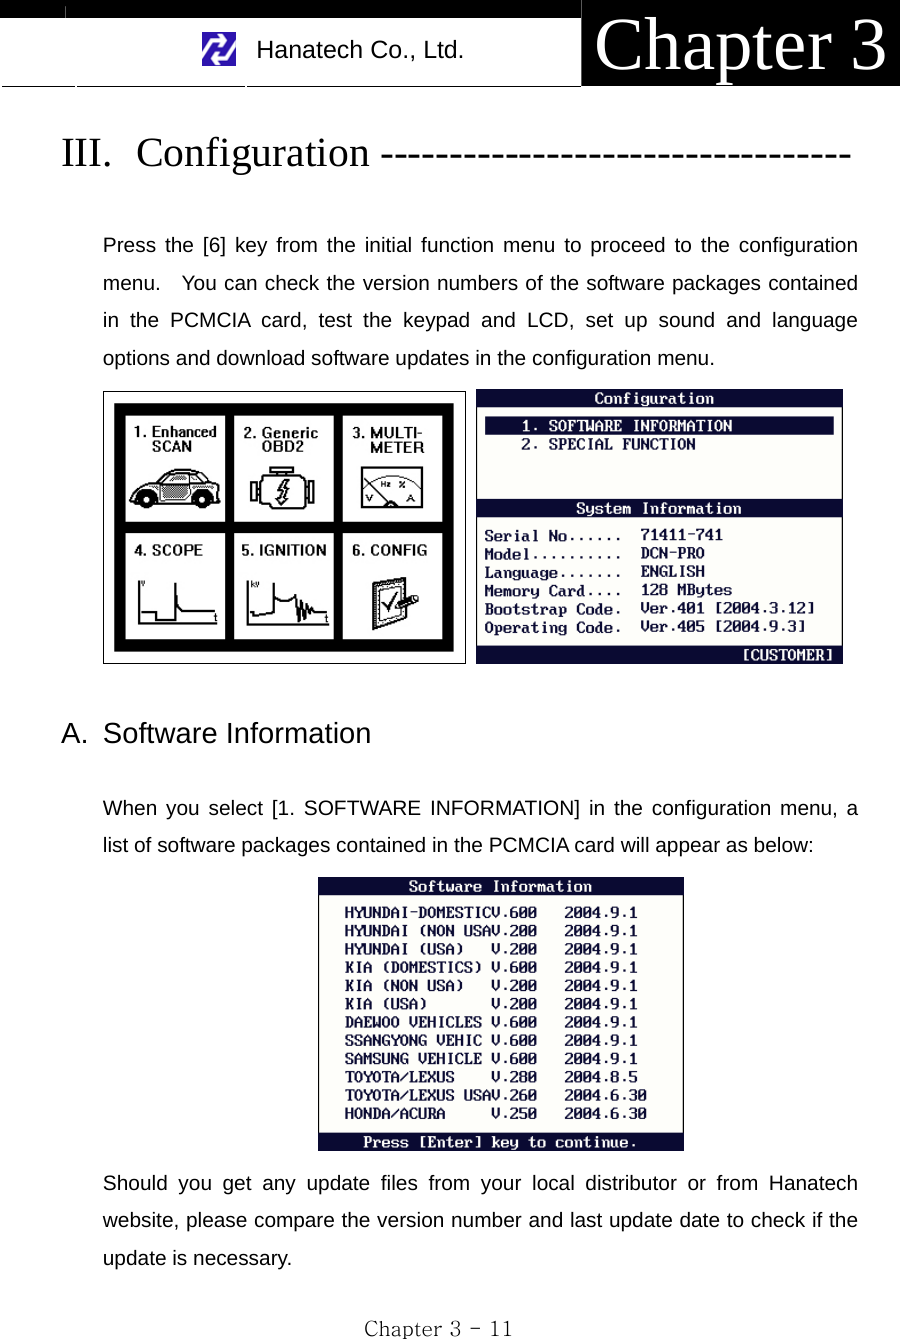     Hanatech Co., Ltd.  Chapter 3 Chapter 3 - 11 III. Configuration ----------------------------------  Press the [6] key from the initial function menu to proceed to the configuration menu.   You can check the version numbers of the software packages contained in the PCMCIA card, test the keypad and LCD, set up sound and language options and download software updates in the configuration menu.     A. Software Information  When you select [1. SOFTWARE INFORMATION] in the configuration menu, a list of software packages contained in the PCMCIA card will appear as below:  Should you get any update files from your local distributor or from Hanatech website, please compare the version number and last update date to check if the update is necessary.  